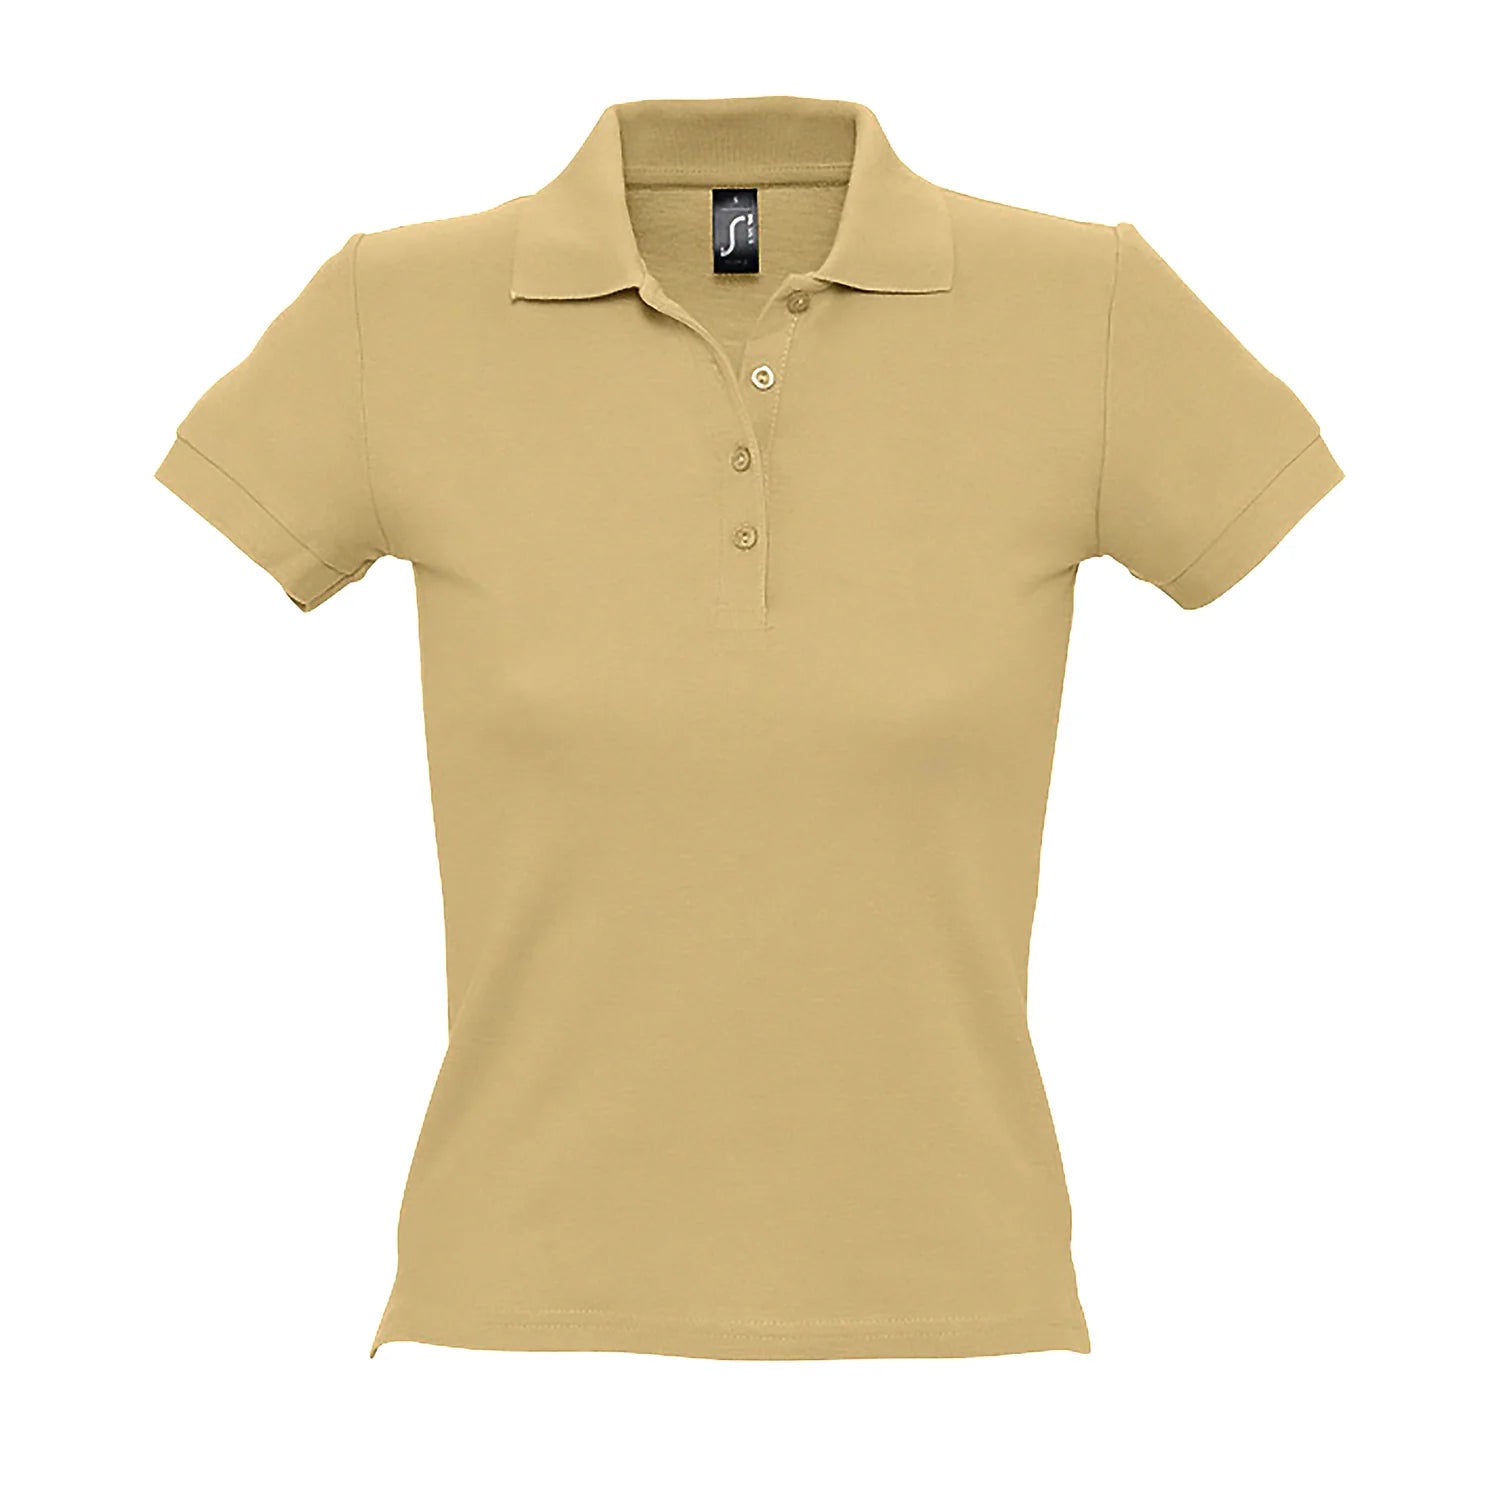 3 Easy Steps to Maintain Your Polo Shirts